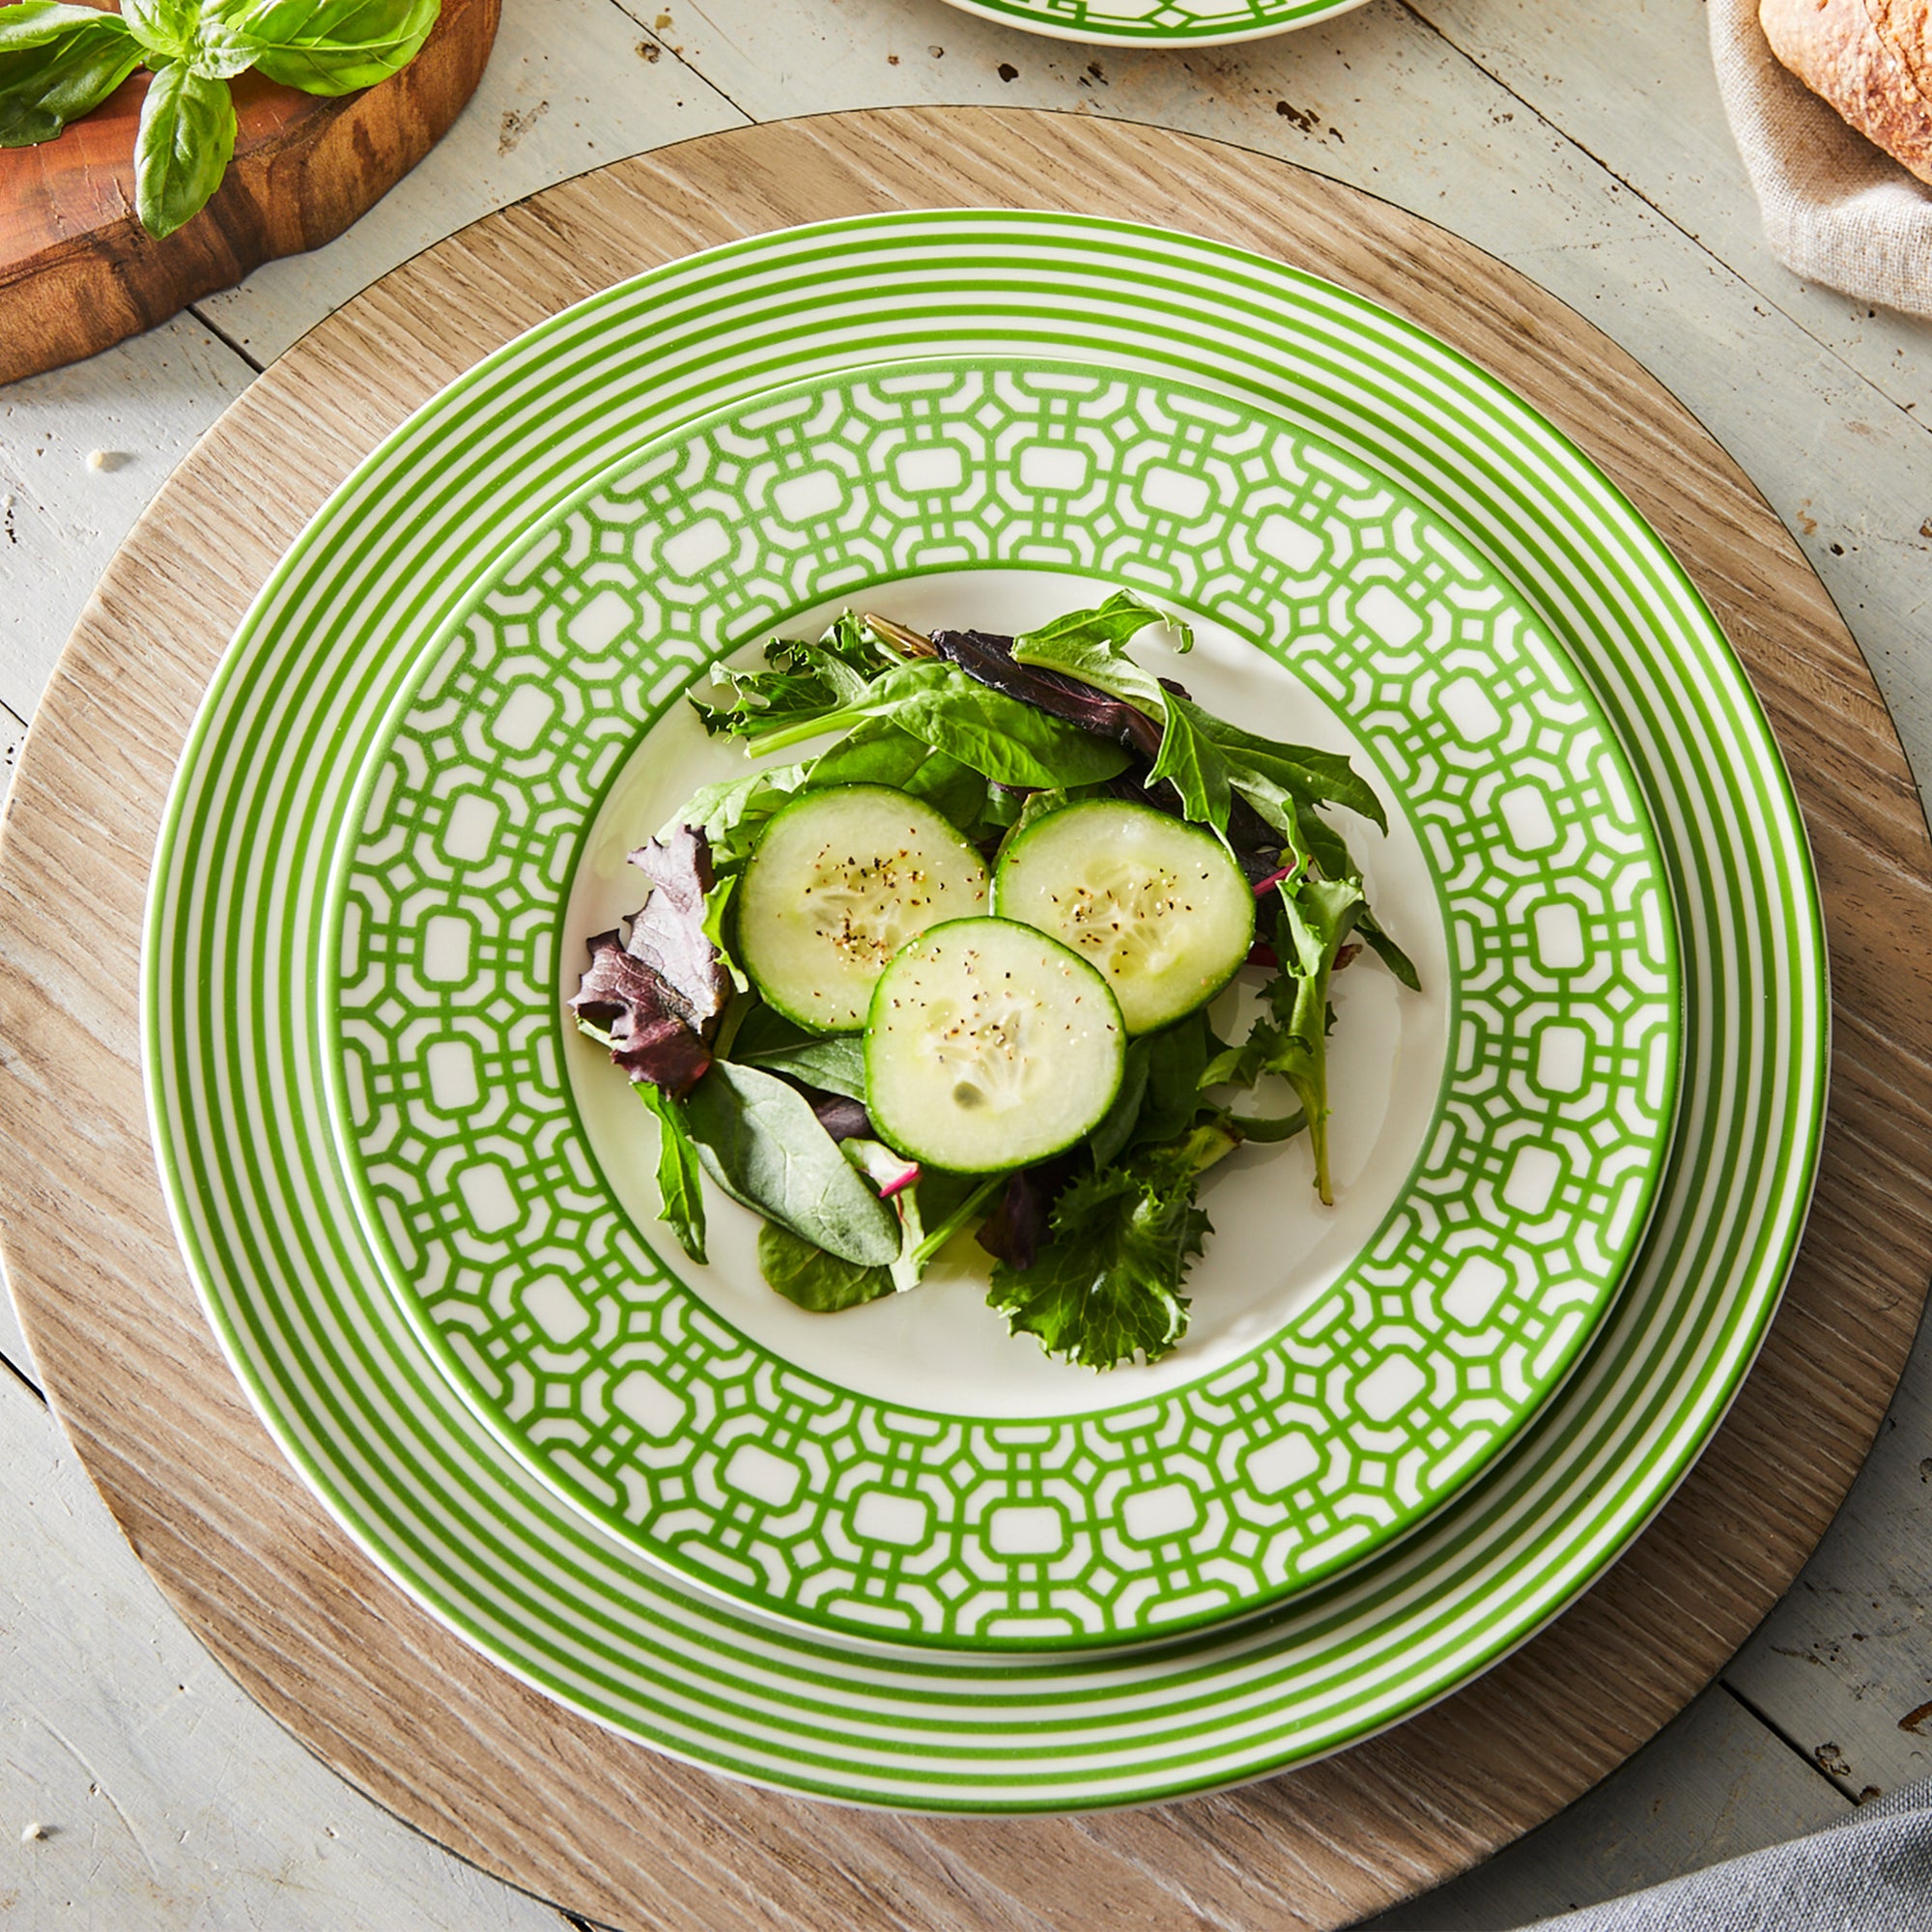 A **Newport Stripe Verde Rimmed Dinner Plate** featuring the Newport Stripe design with closely spaced green concentric circles around the rim, crafted from high-fired porcelain by **Caskata Artisanal Home**.